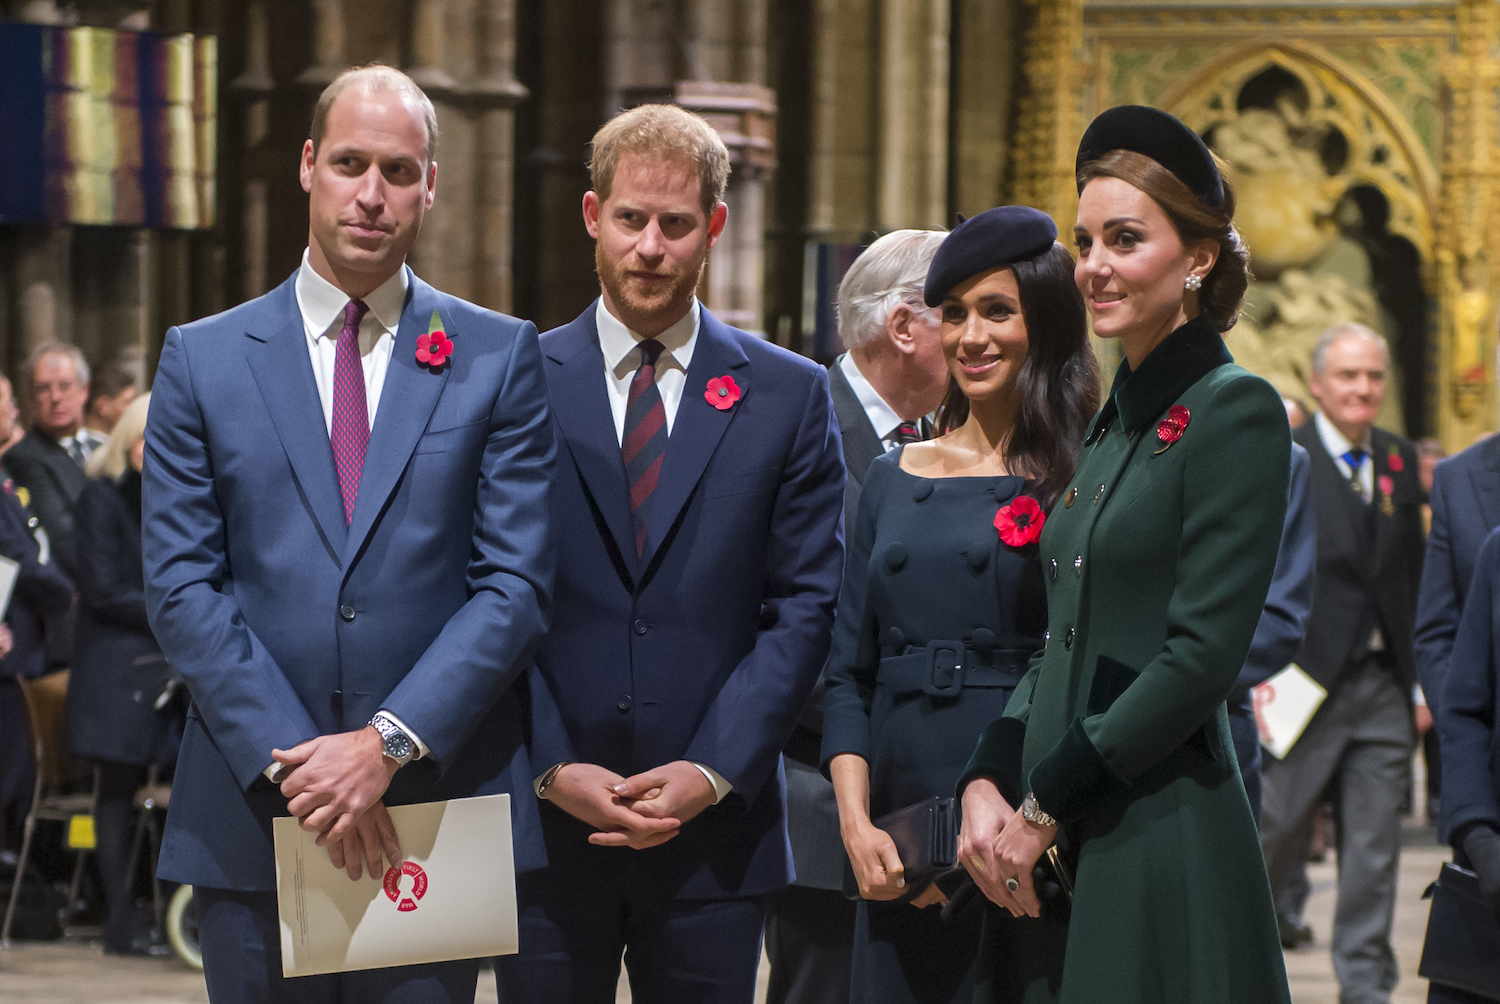 Prince William, Kate Middleton, Prince Harry, and Meghan Markle attend a service marking the centenary of WW1 armistice at Westminster Abbey